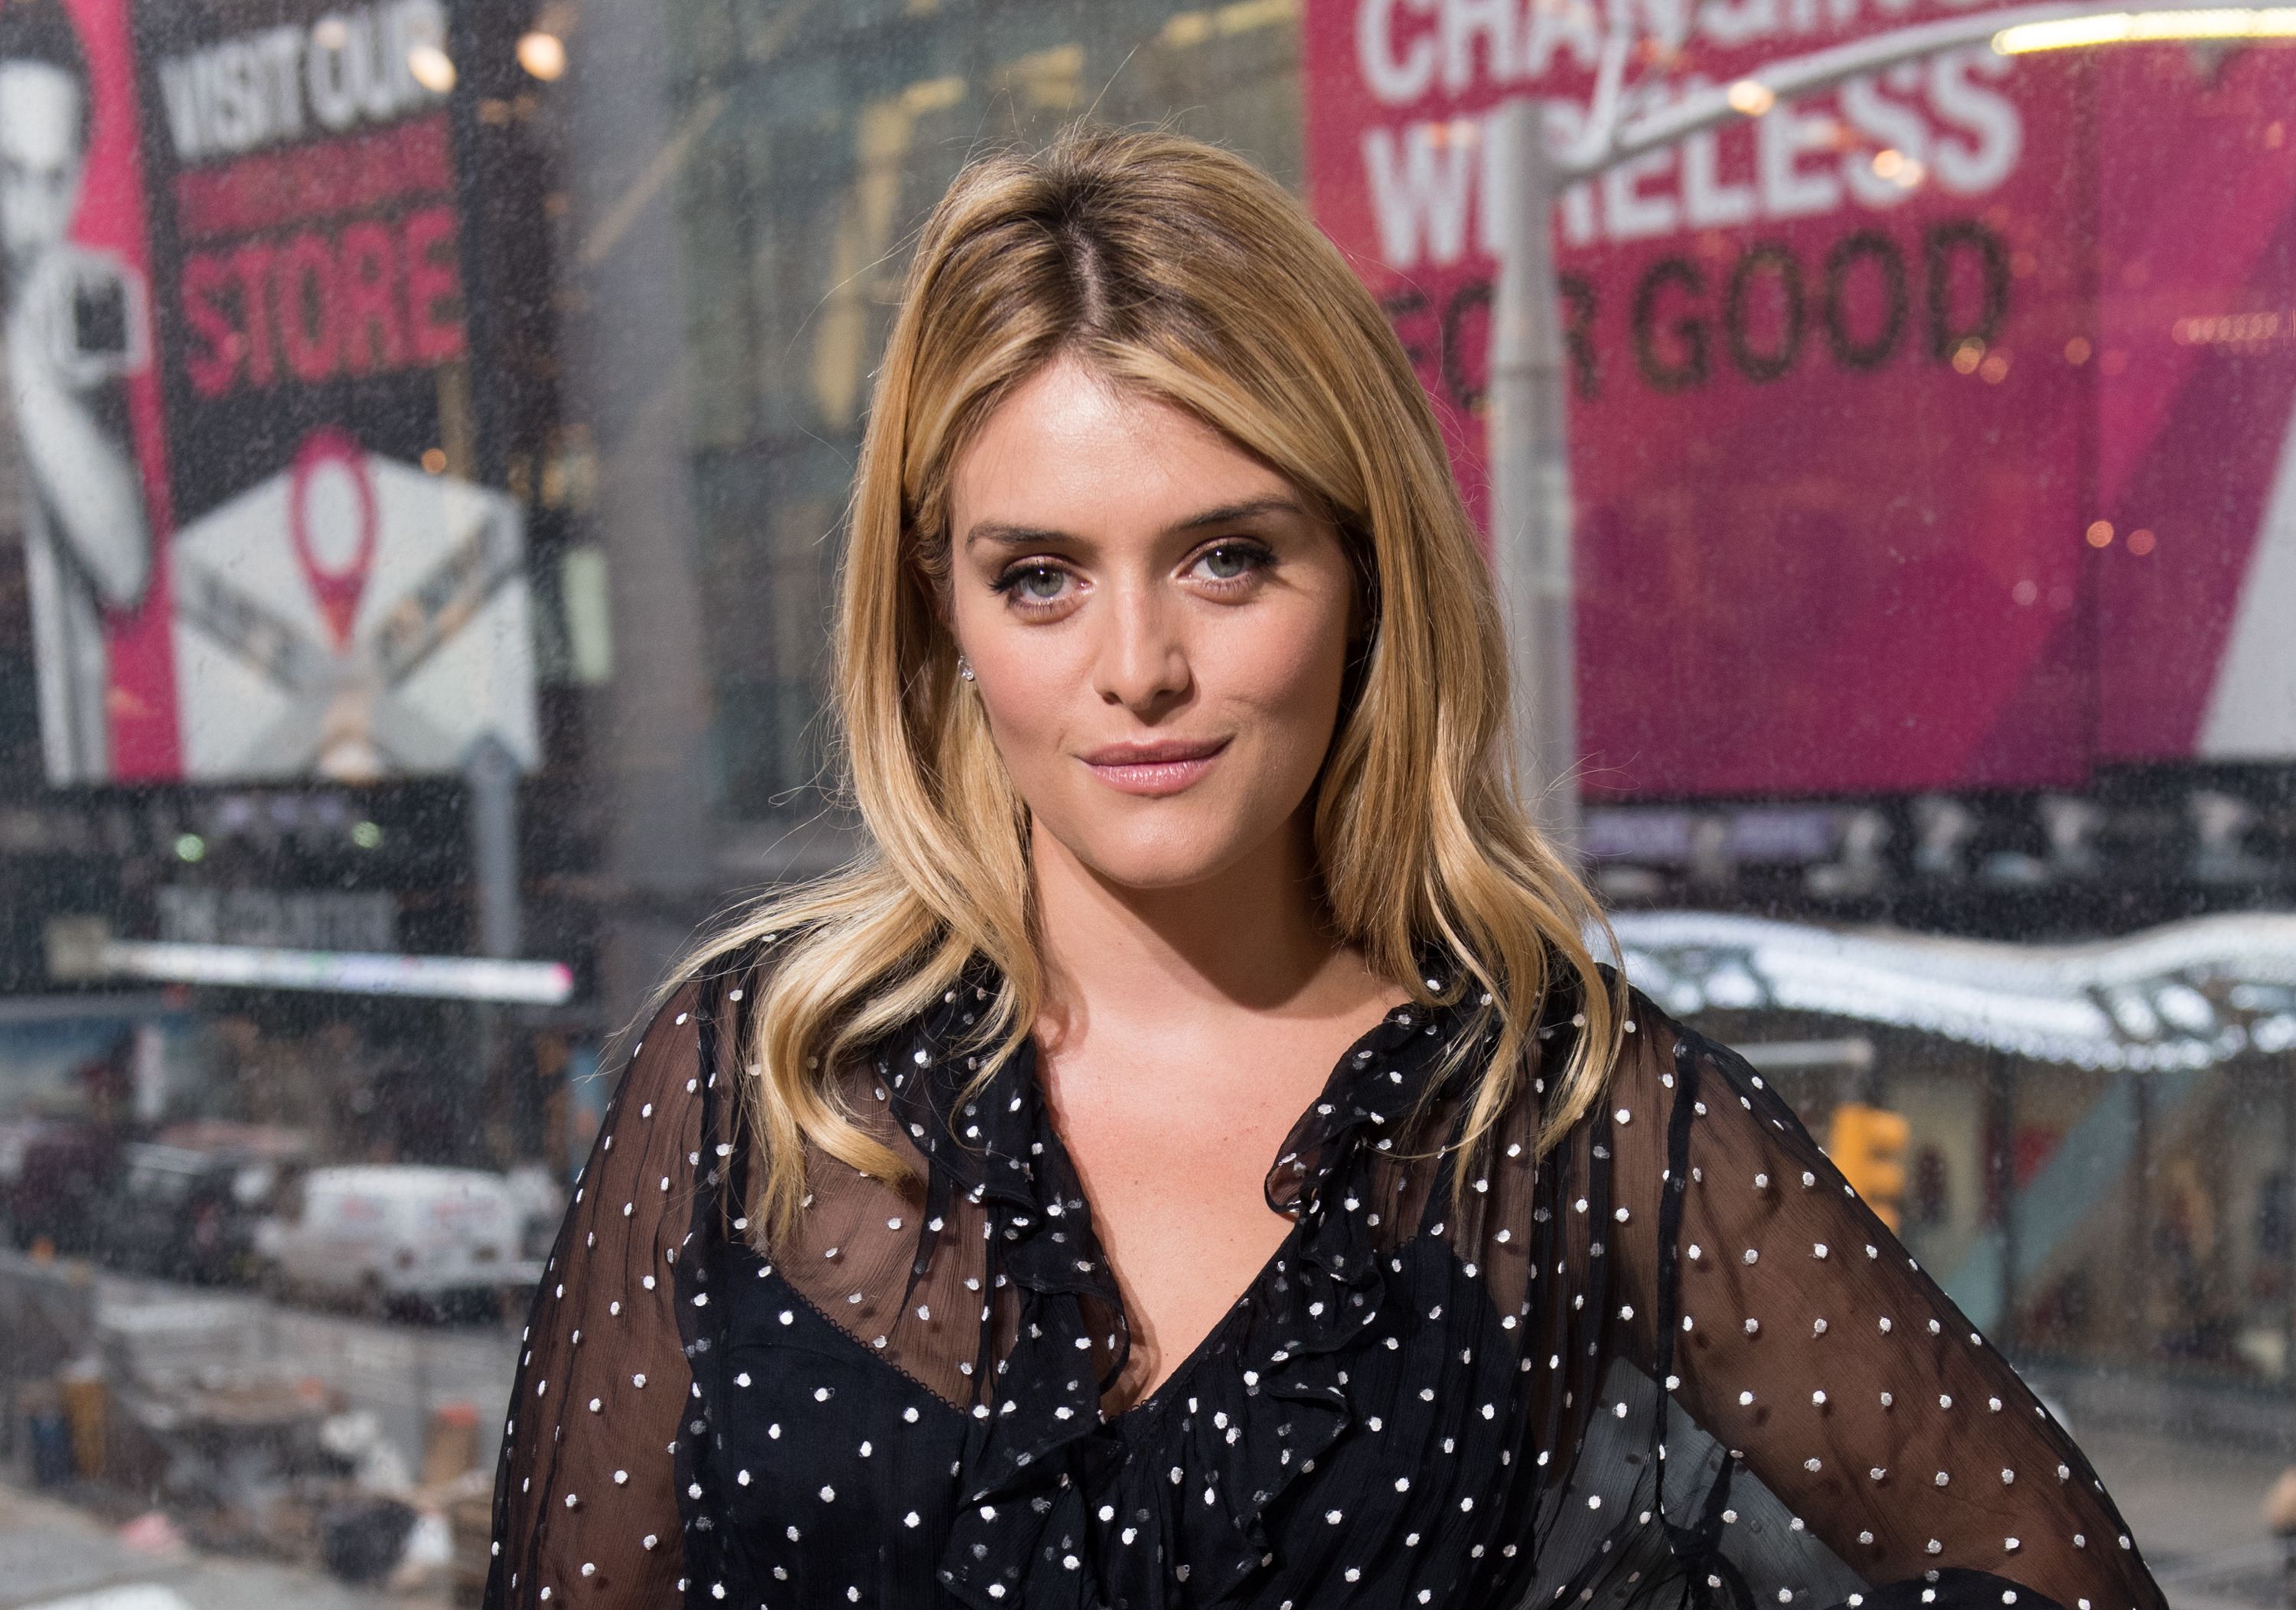 Daphne Oz visits "Extra" at H&M Times Square on September 27, 2016 in New York City | Photo: Getty Images 